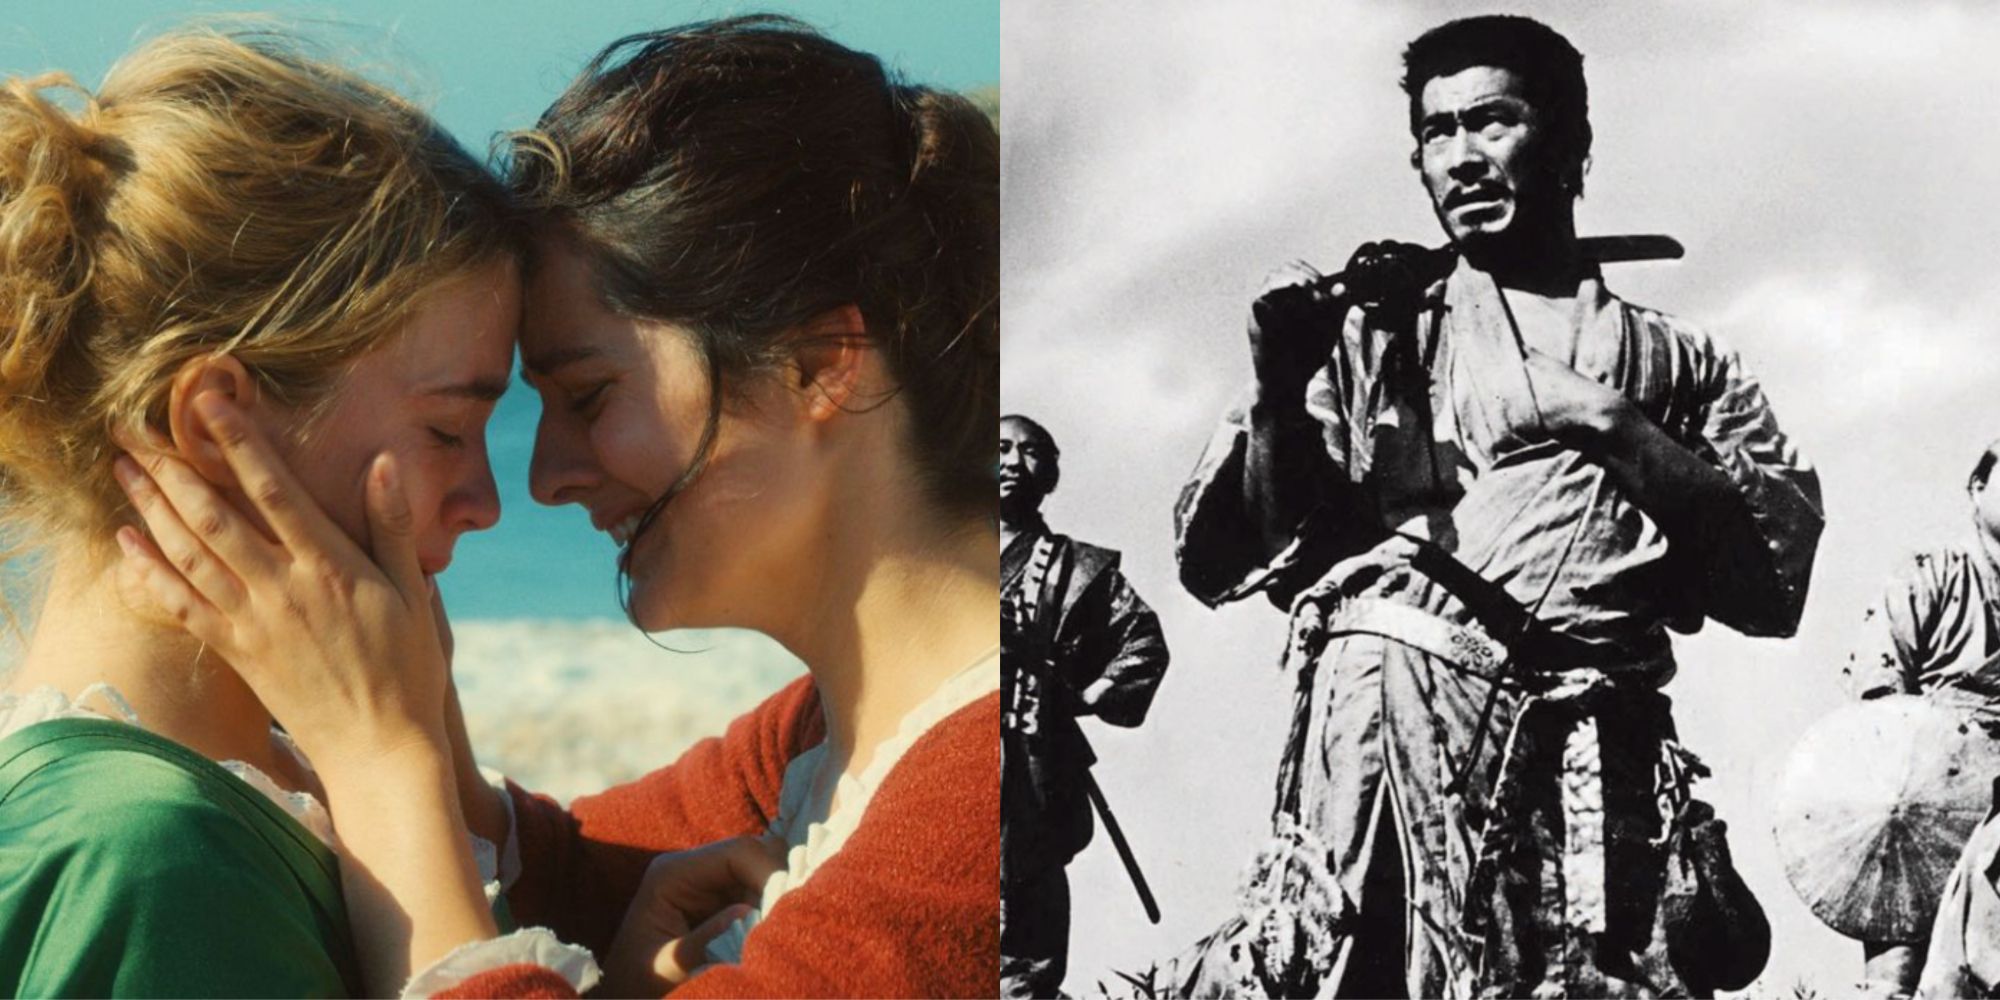 The Top 10 Criterion Films According to Today's Greatest Filmmakers